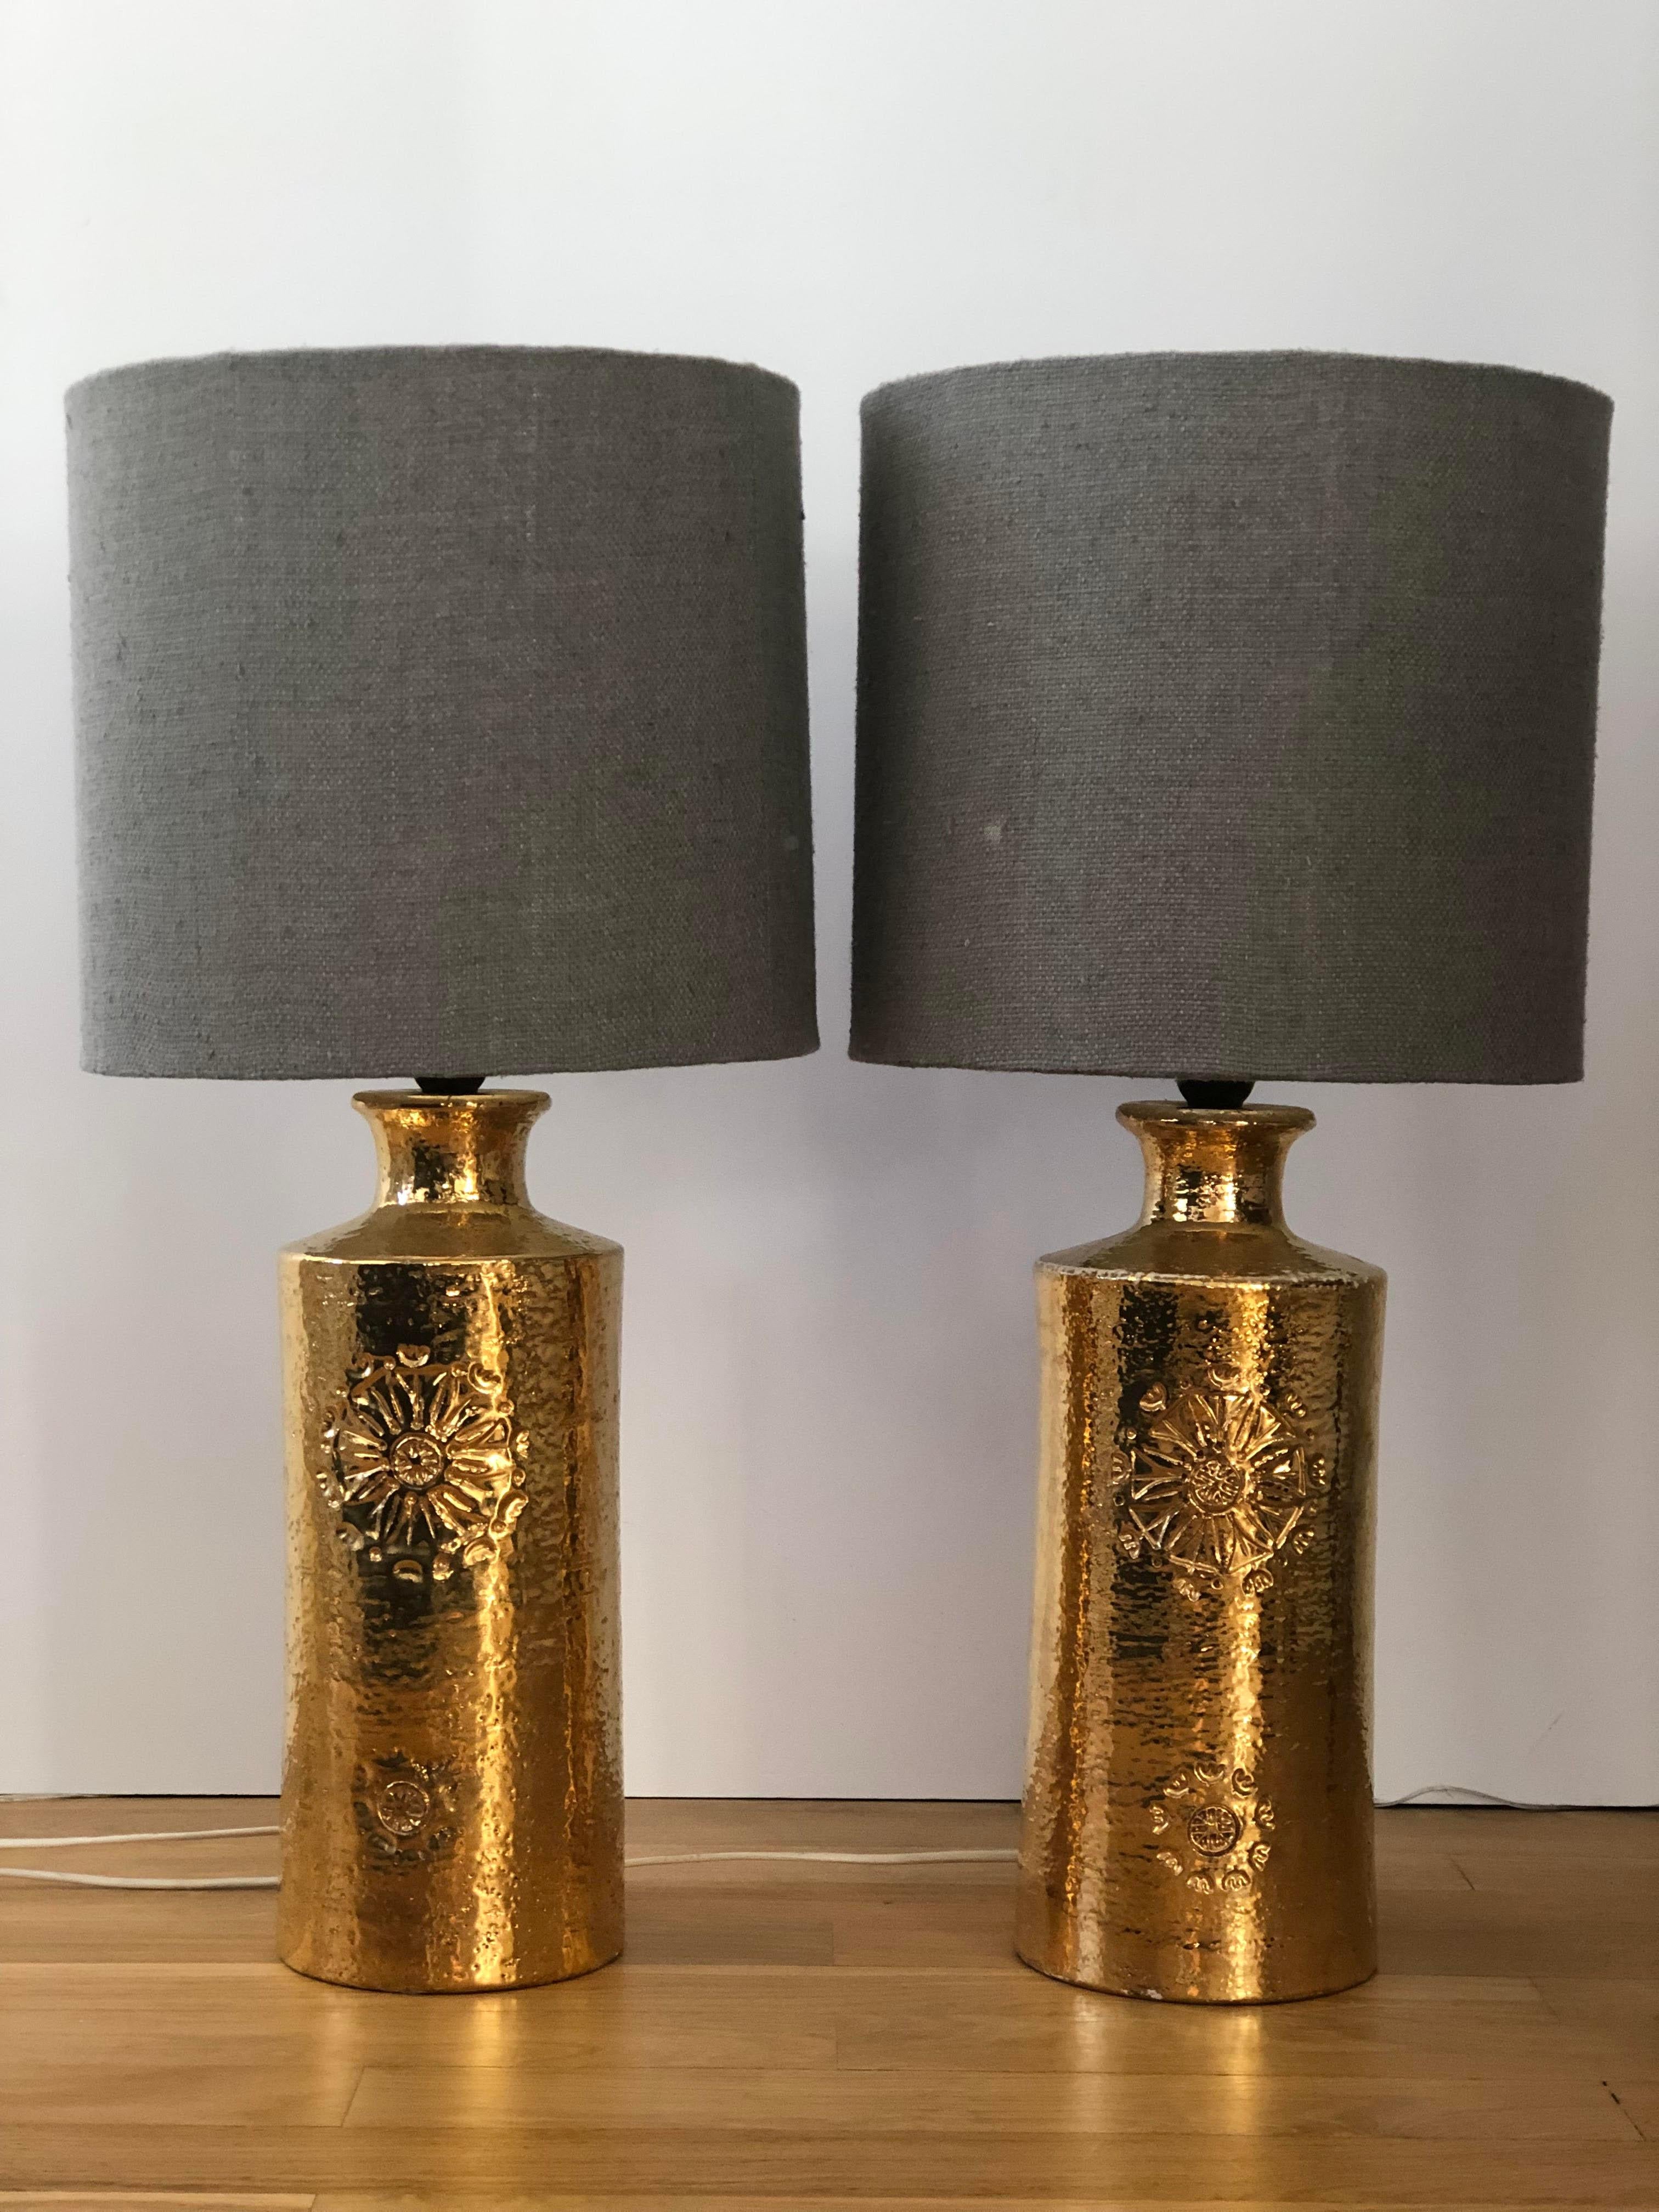 Pair of gilt table lamps designed by Aldo Londi for Bitossi, Italy and manufactured by Bergboms, Sweden. Made of ceramics, gold glazed with a hand incised flower on the front.
Mid-Century Modern European design, vintage original 1970s production.